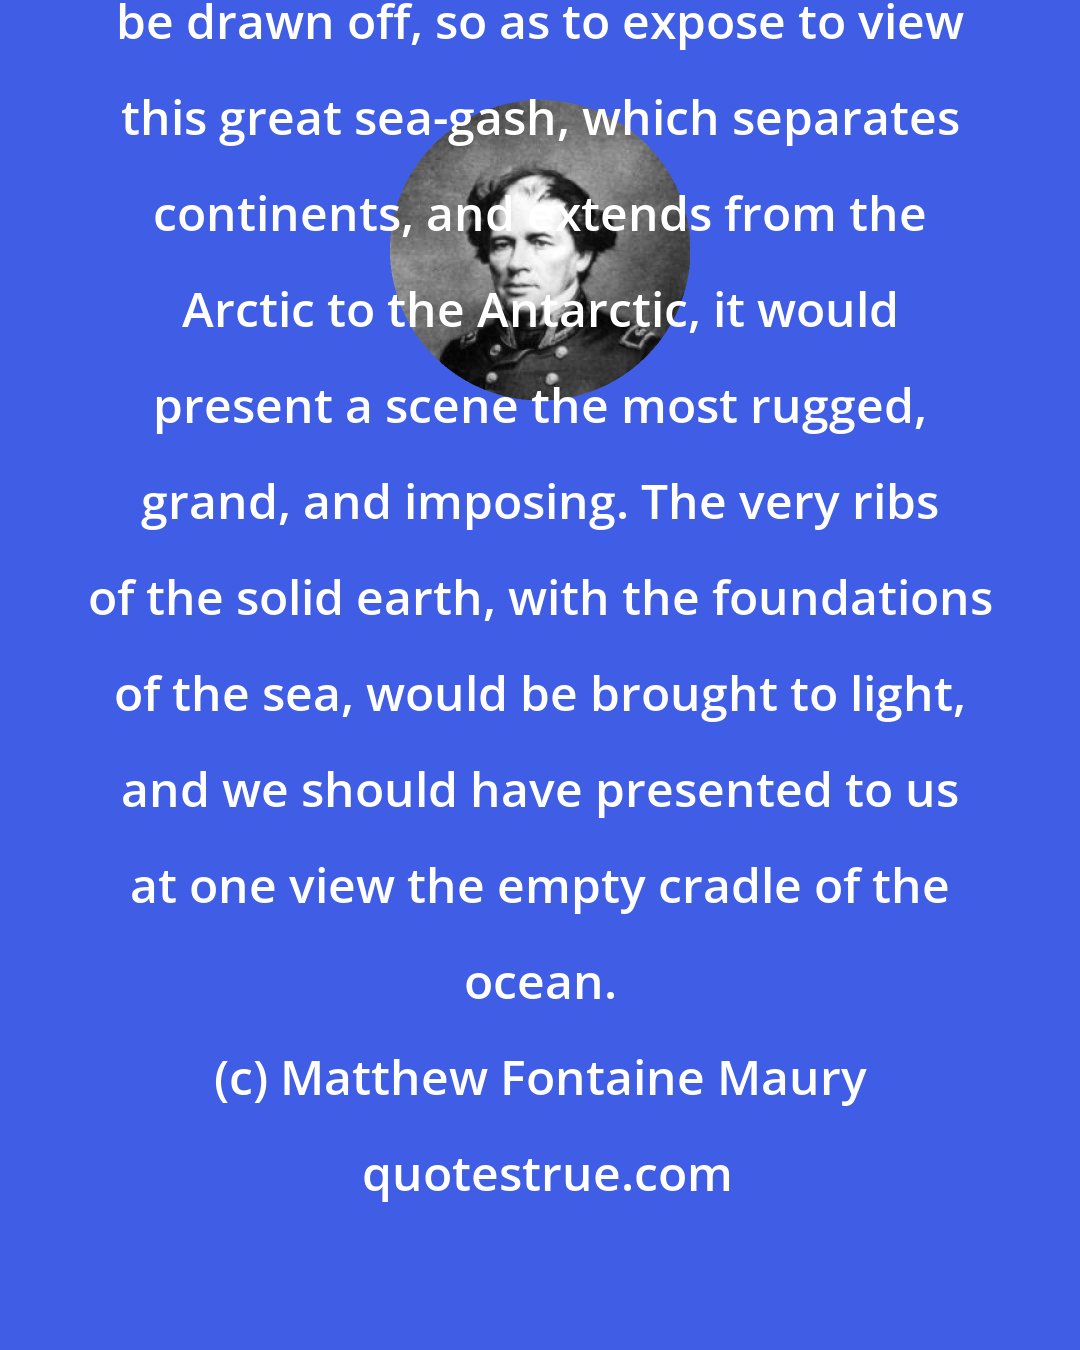 Matthew Fontaine Maury: Could the waters of the Atlantic be drawn off, so as to expose to view this great sea-gash, which separates continents, and extends from the Arctic to the Antarctic, it would present a scene the most rugged, grand, and imposing. The very ribs of the solid earth, with the foundations of the sea, would be brought to light, and we should have presented to us at one view the empty cradle of the ocean.